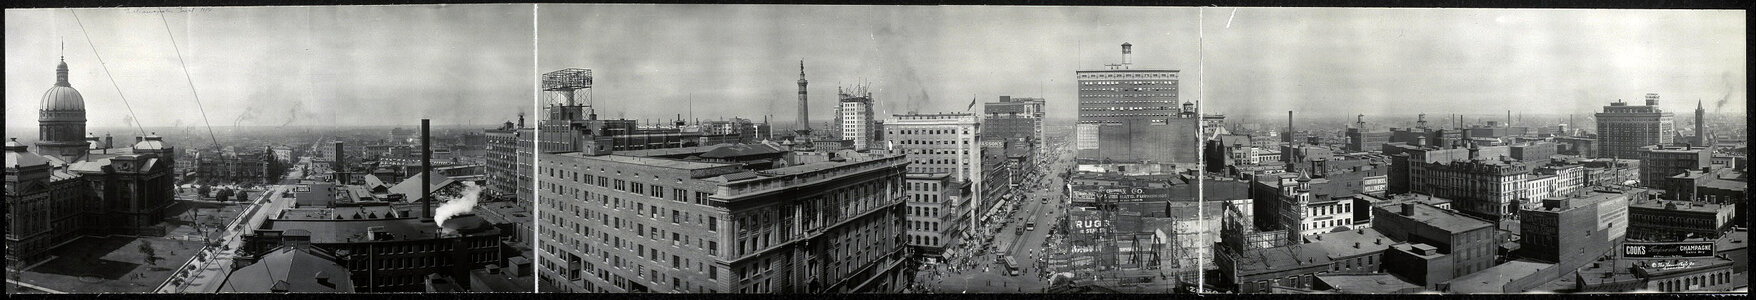 1914 panorama of downtown Indianapolis, Indiana photo